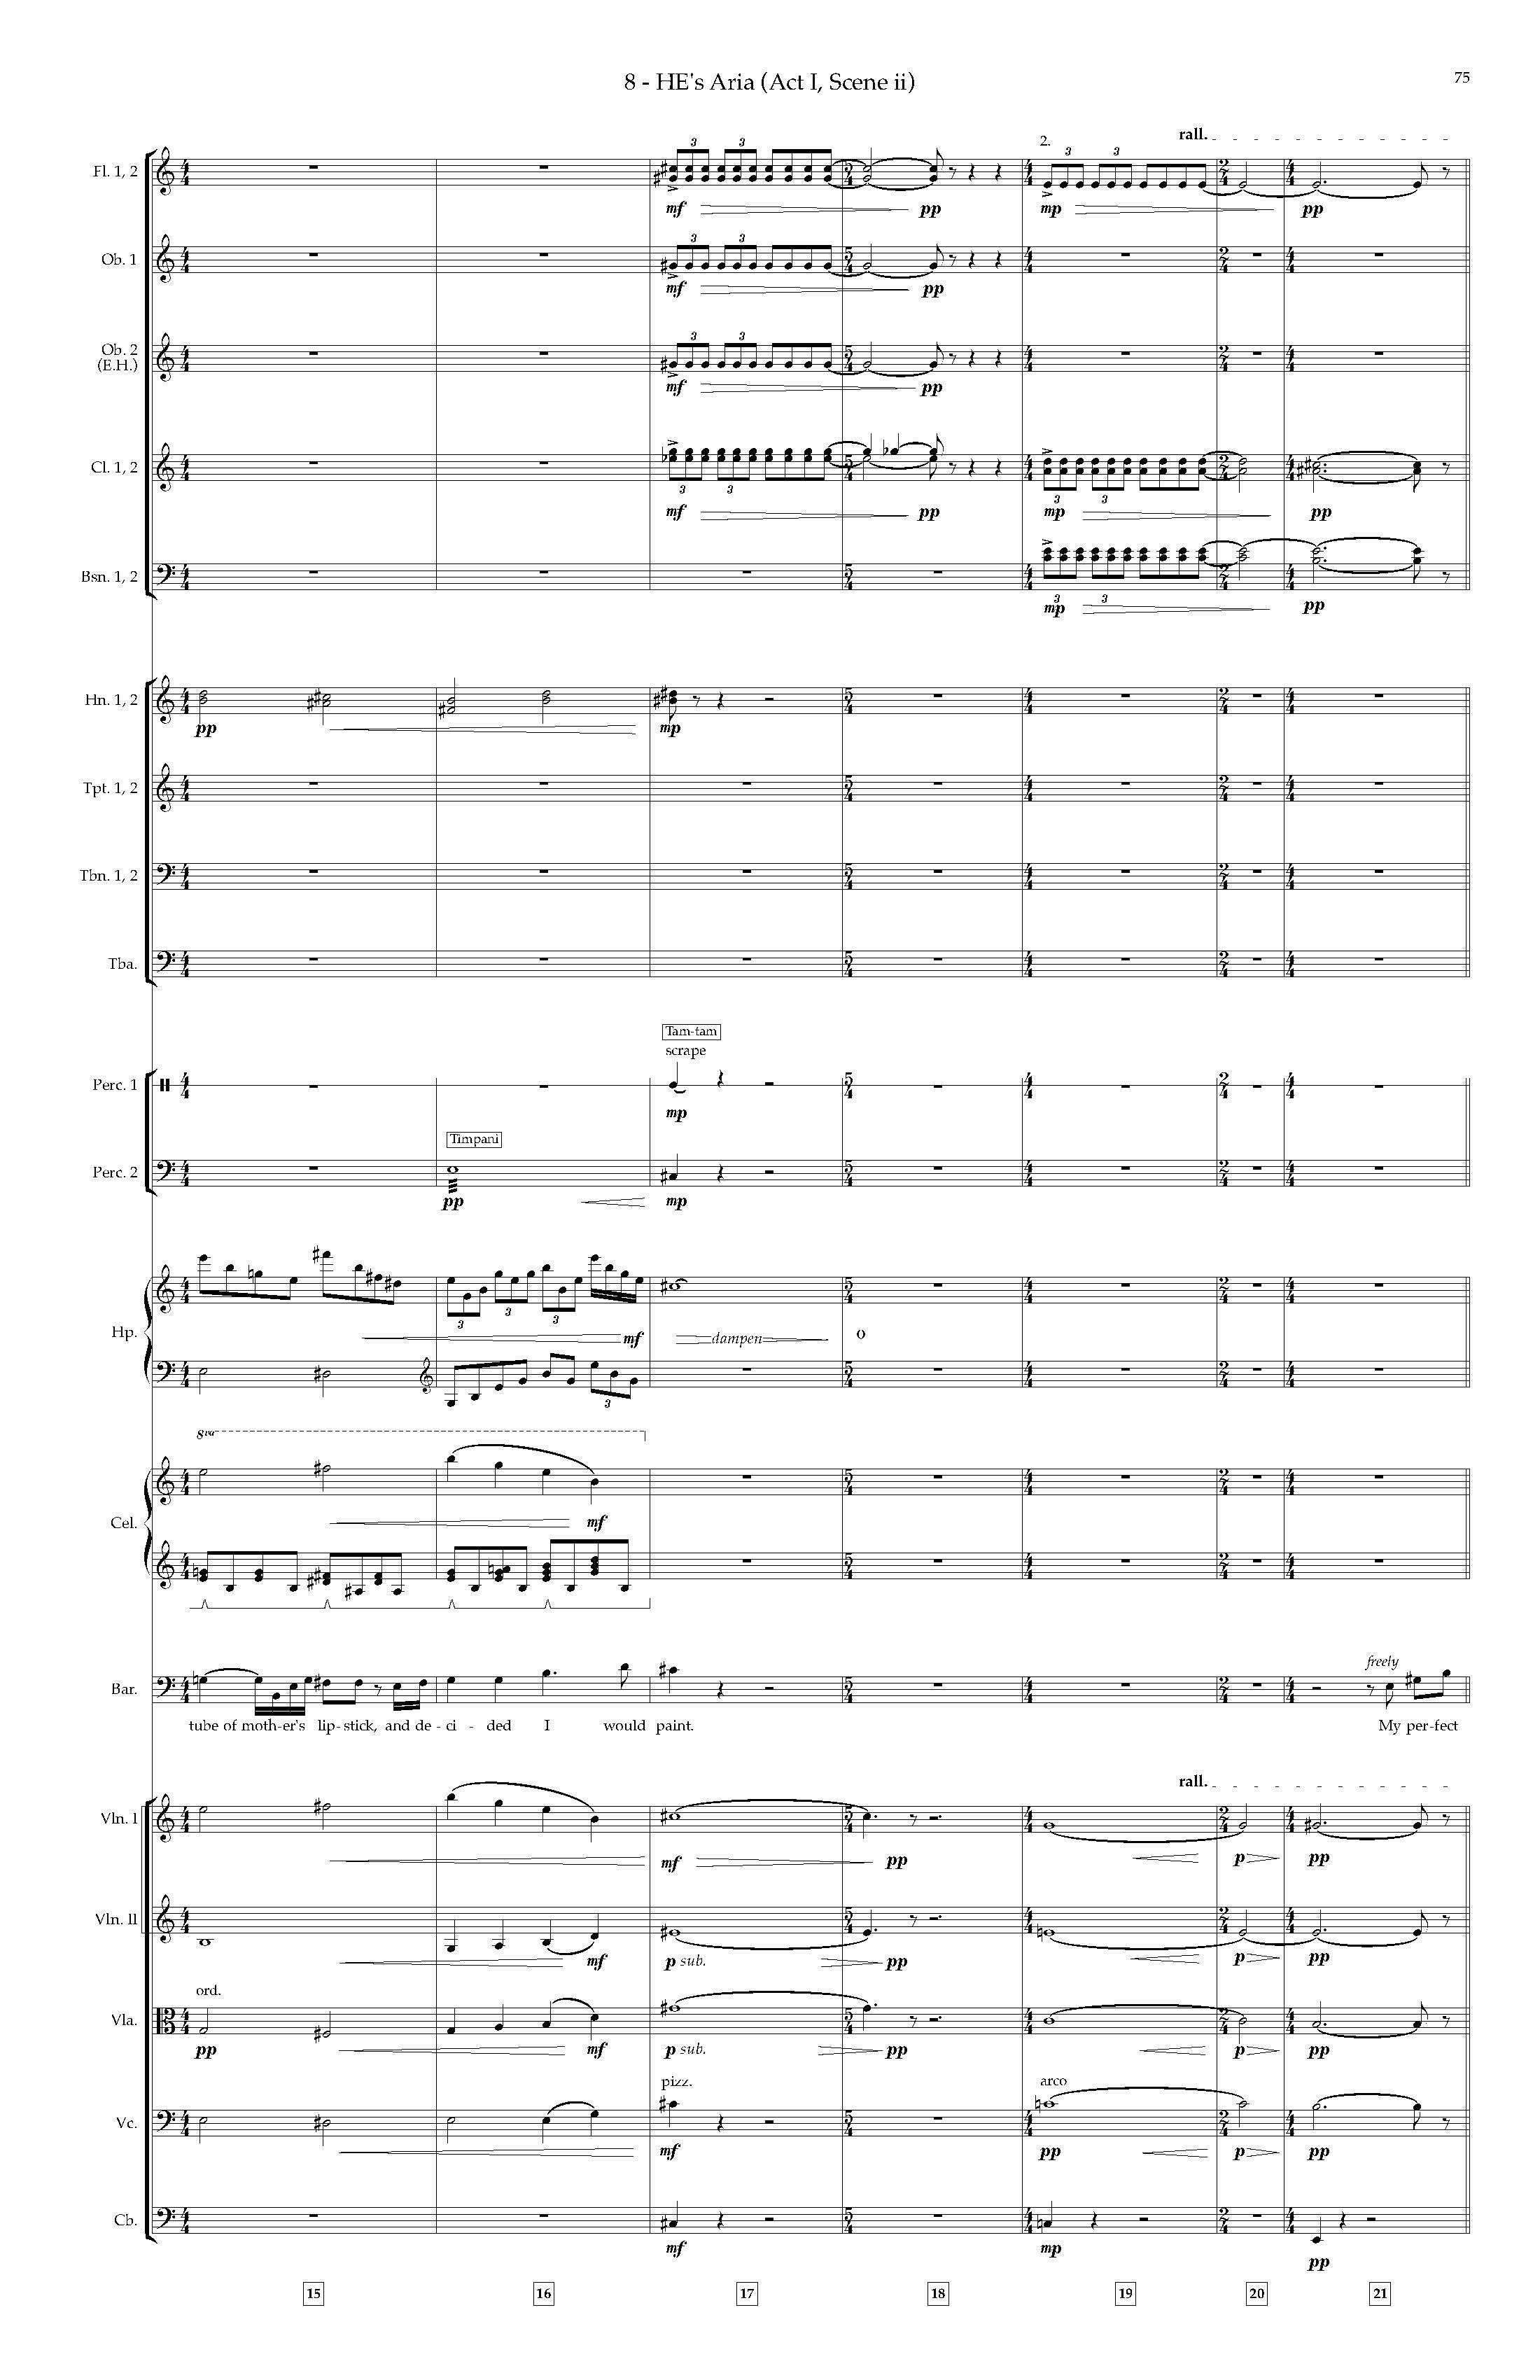 Arias and Interludes from HWGS - Complete Score_Page_81.jpg